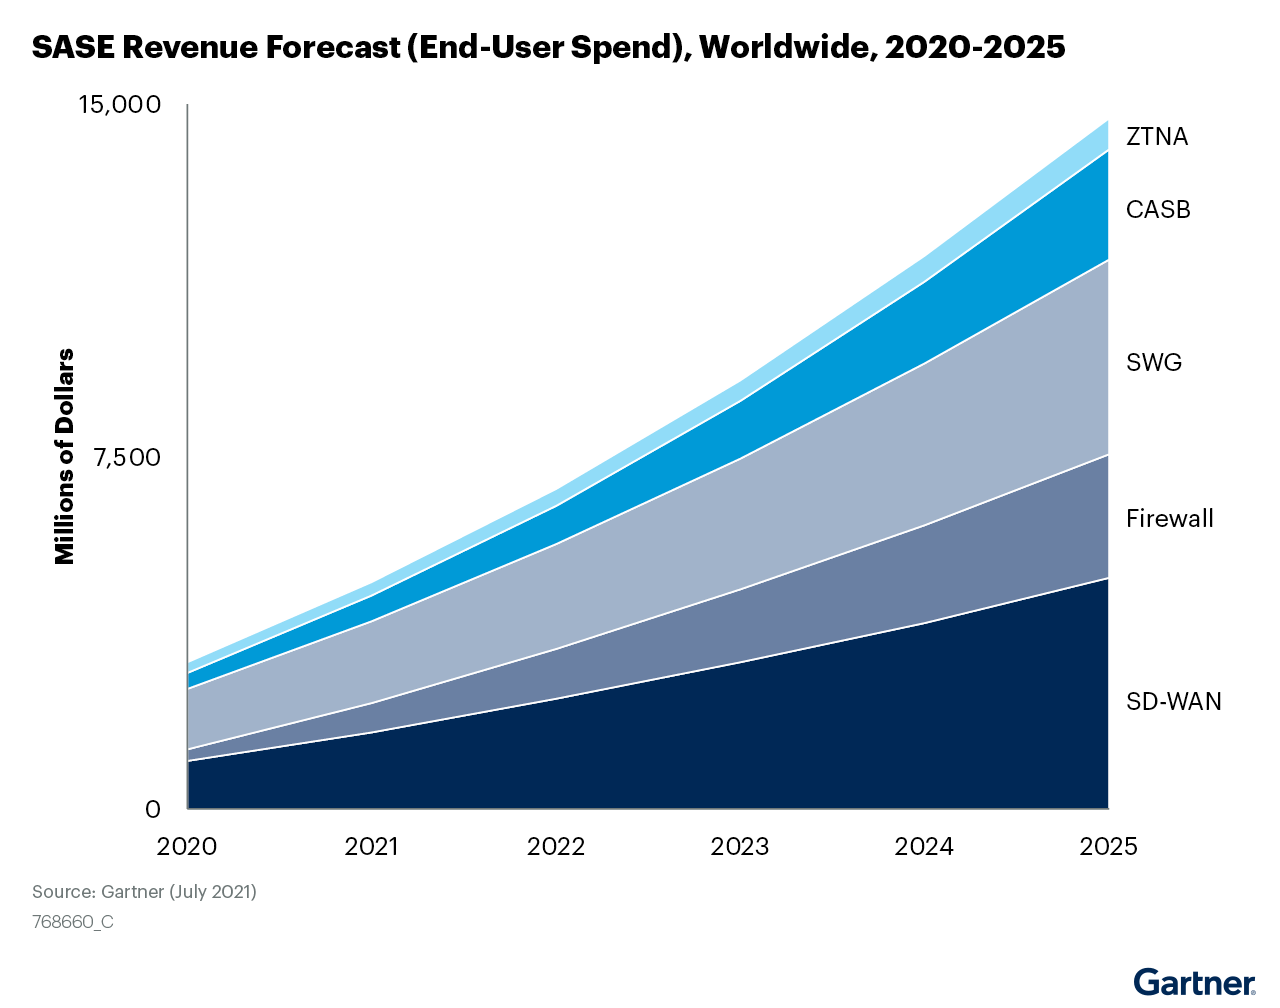 The graph-mentions the projected forecast revenue growth of SASE to $15B in 2025 target